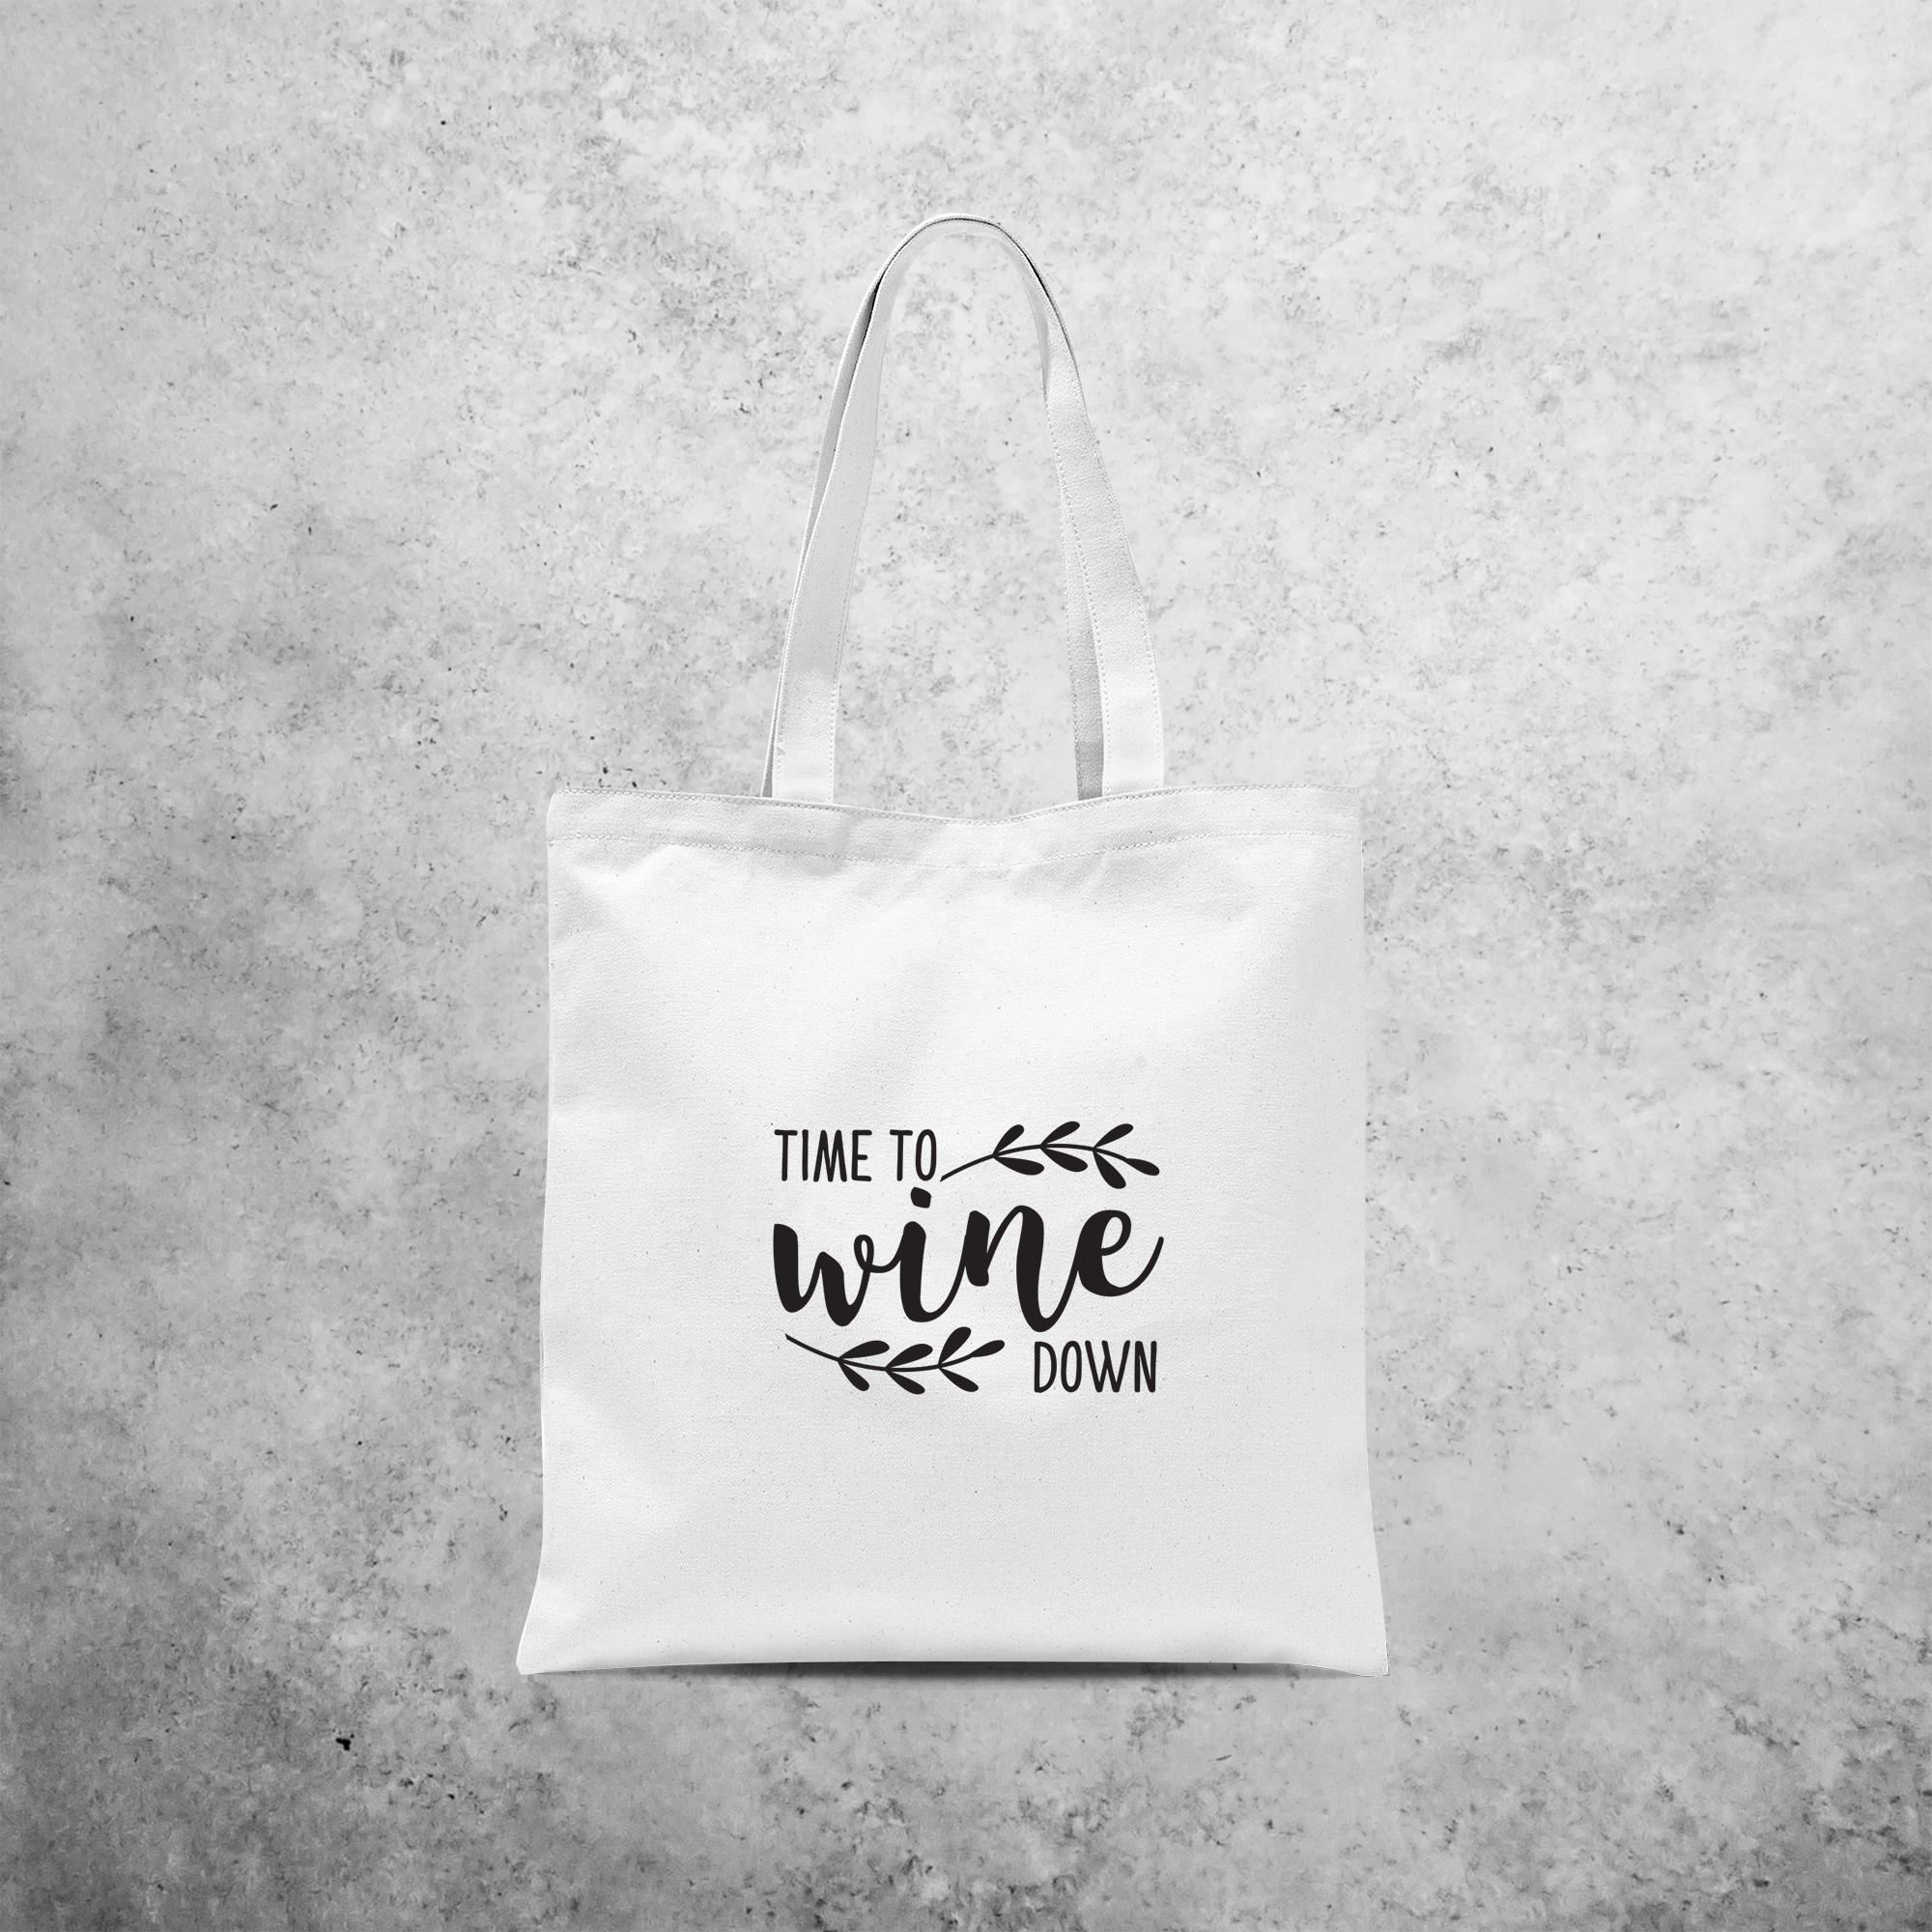 'Time to wine down' tote bag